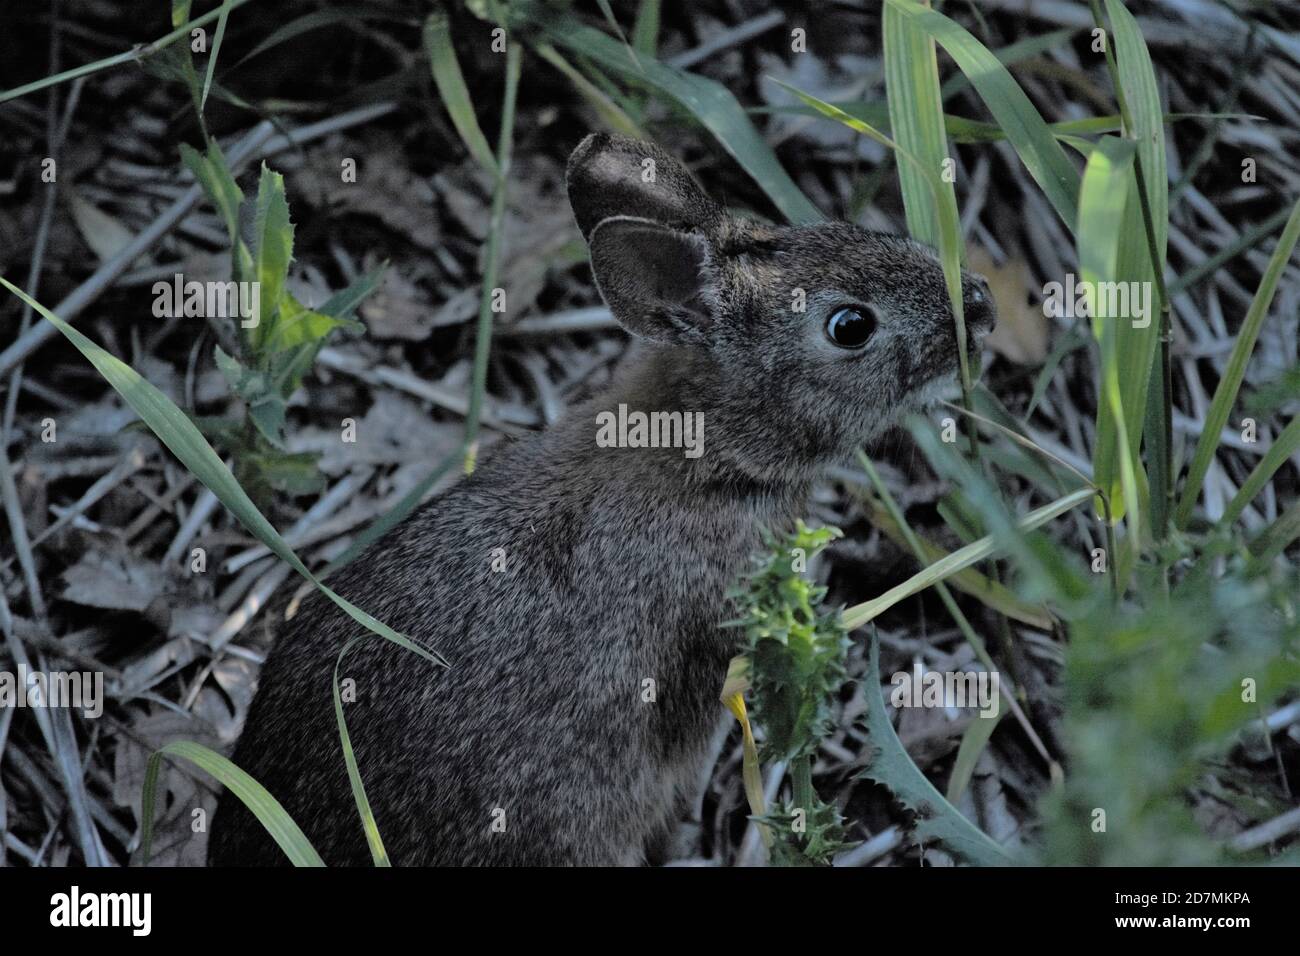 A wild bunny reaching towards some grass at the Tualatin River National Wildlife Refuge. Stock Photo